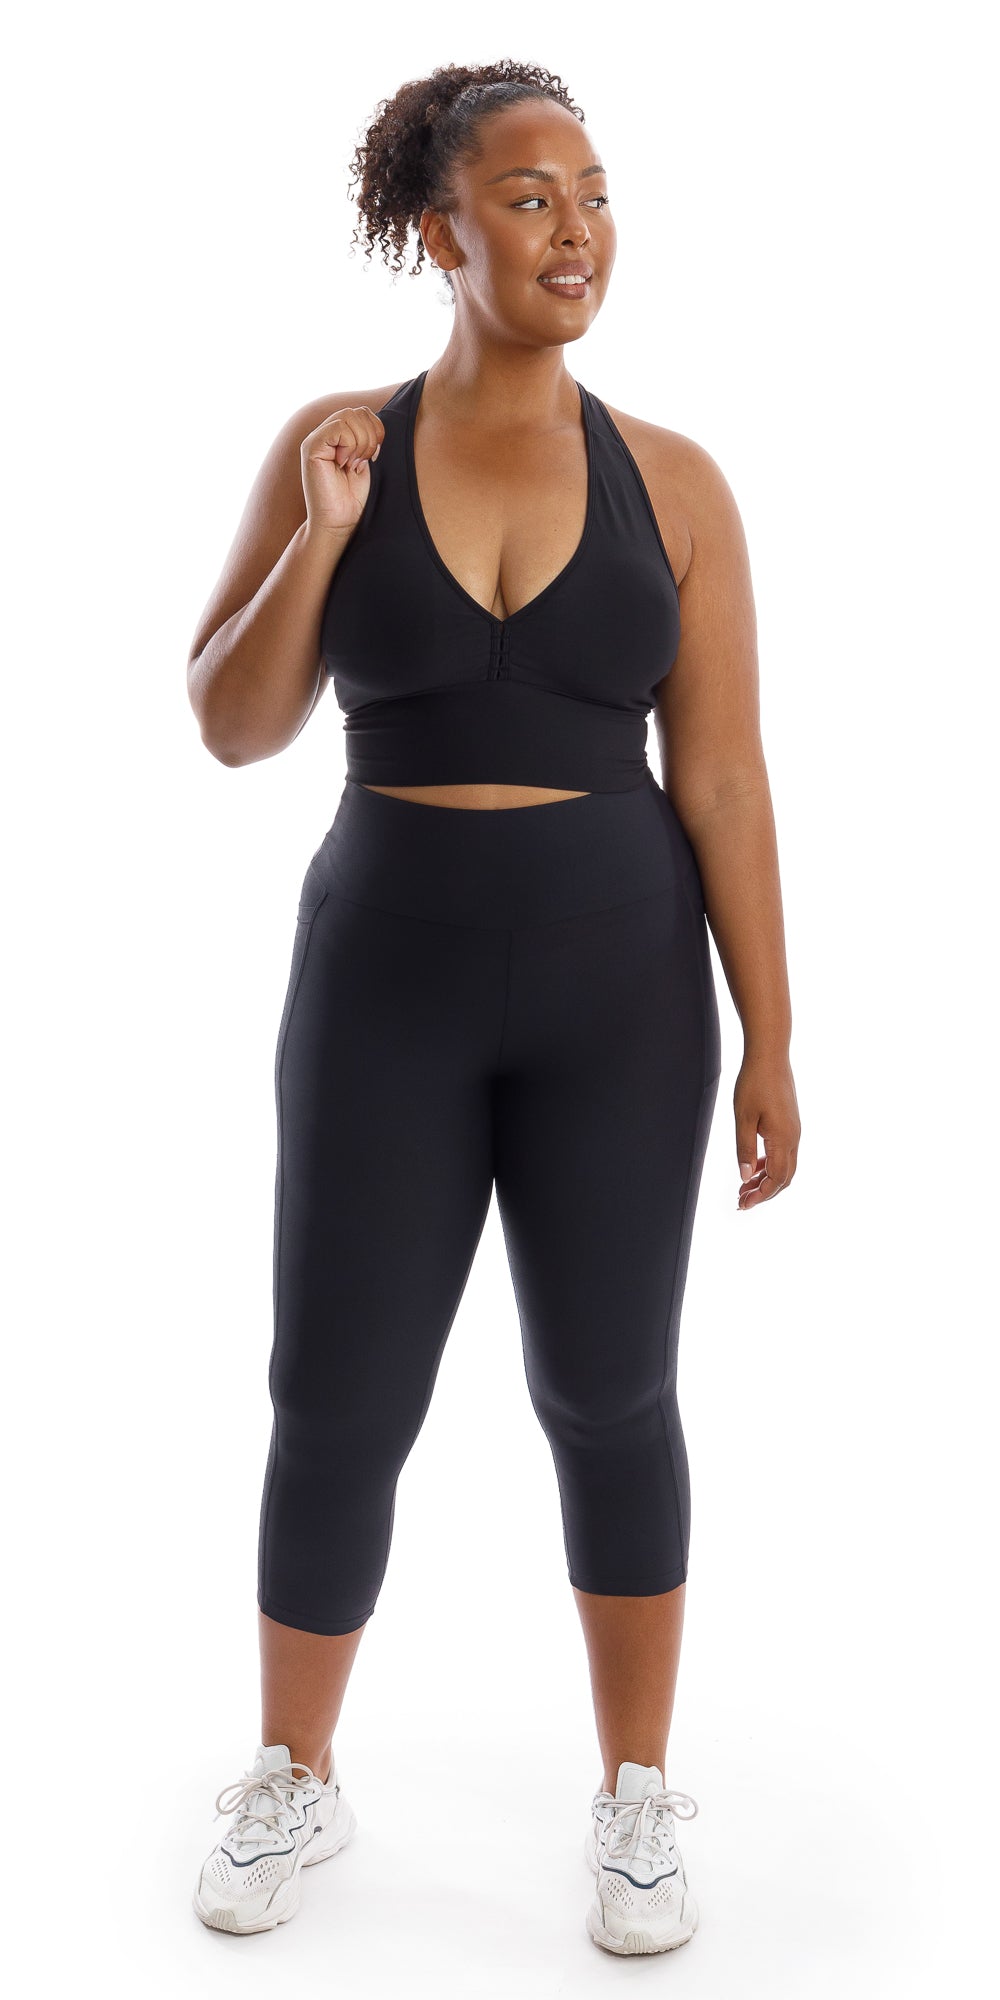 Full body front view of girl in black Midnight Body Luxe Capri Leggings with Pockets and matching bra bringing one arm close to her shoulder and looking to her left